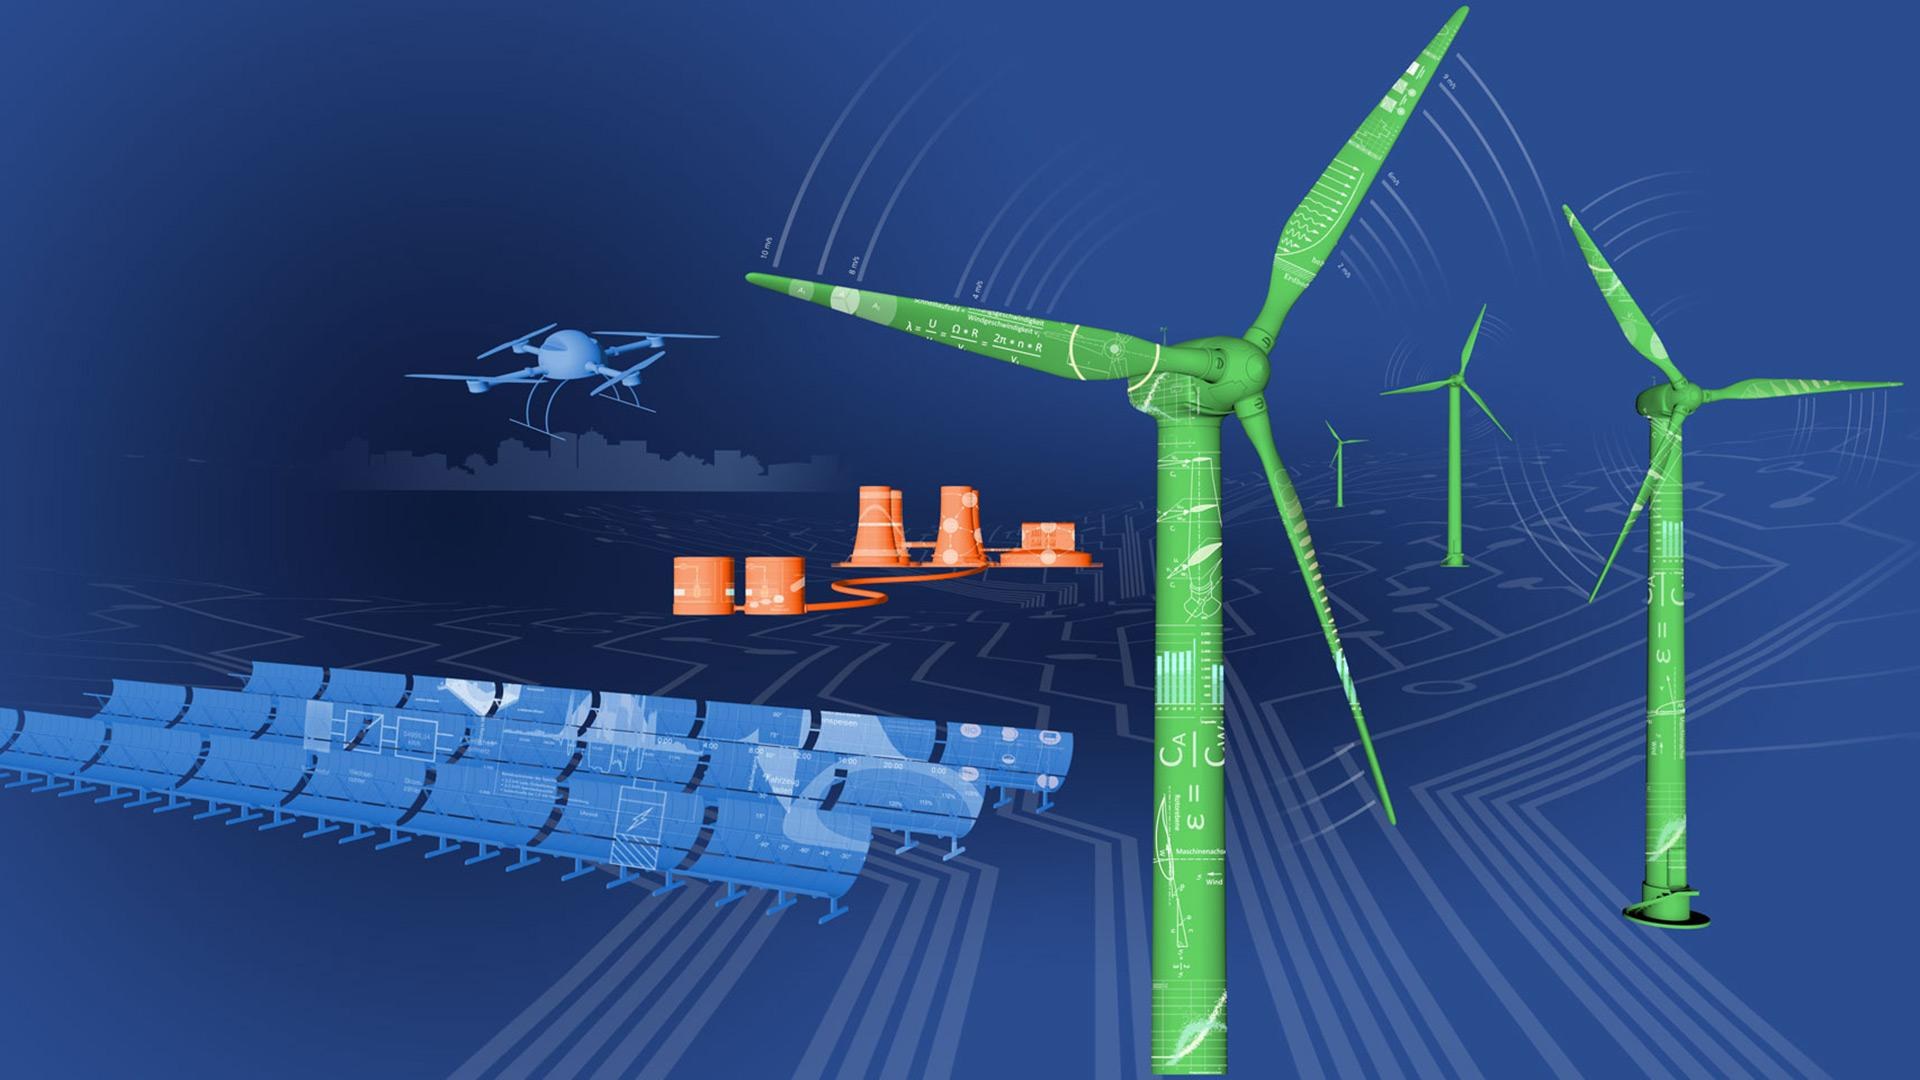 DLR at Hannover Messe 2019 - Digital expertise for the Energy Transition